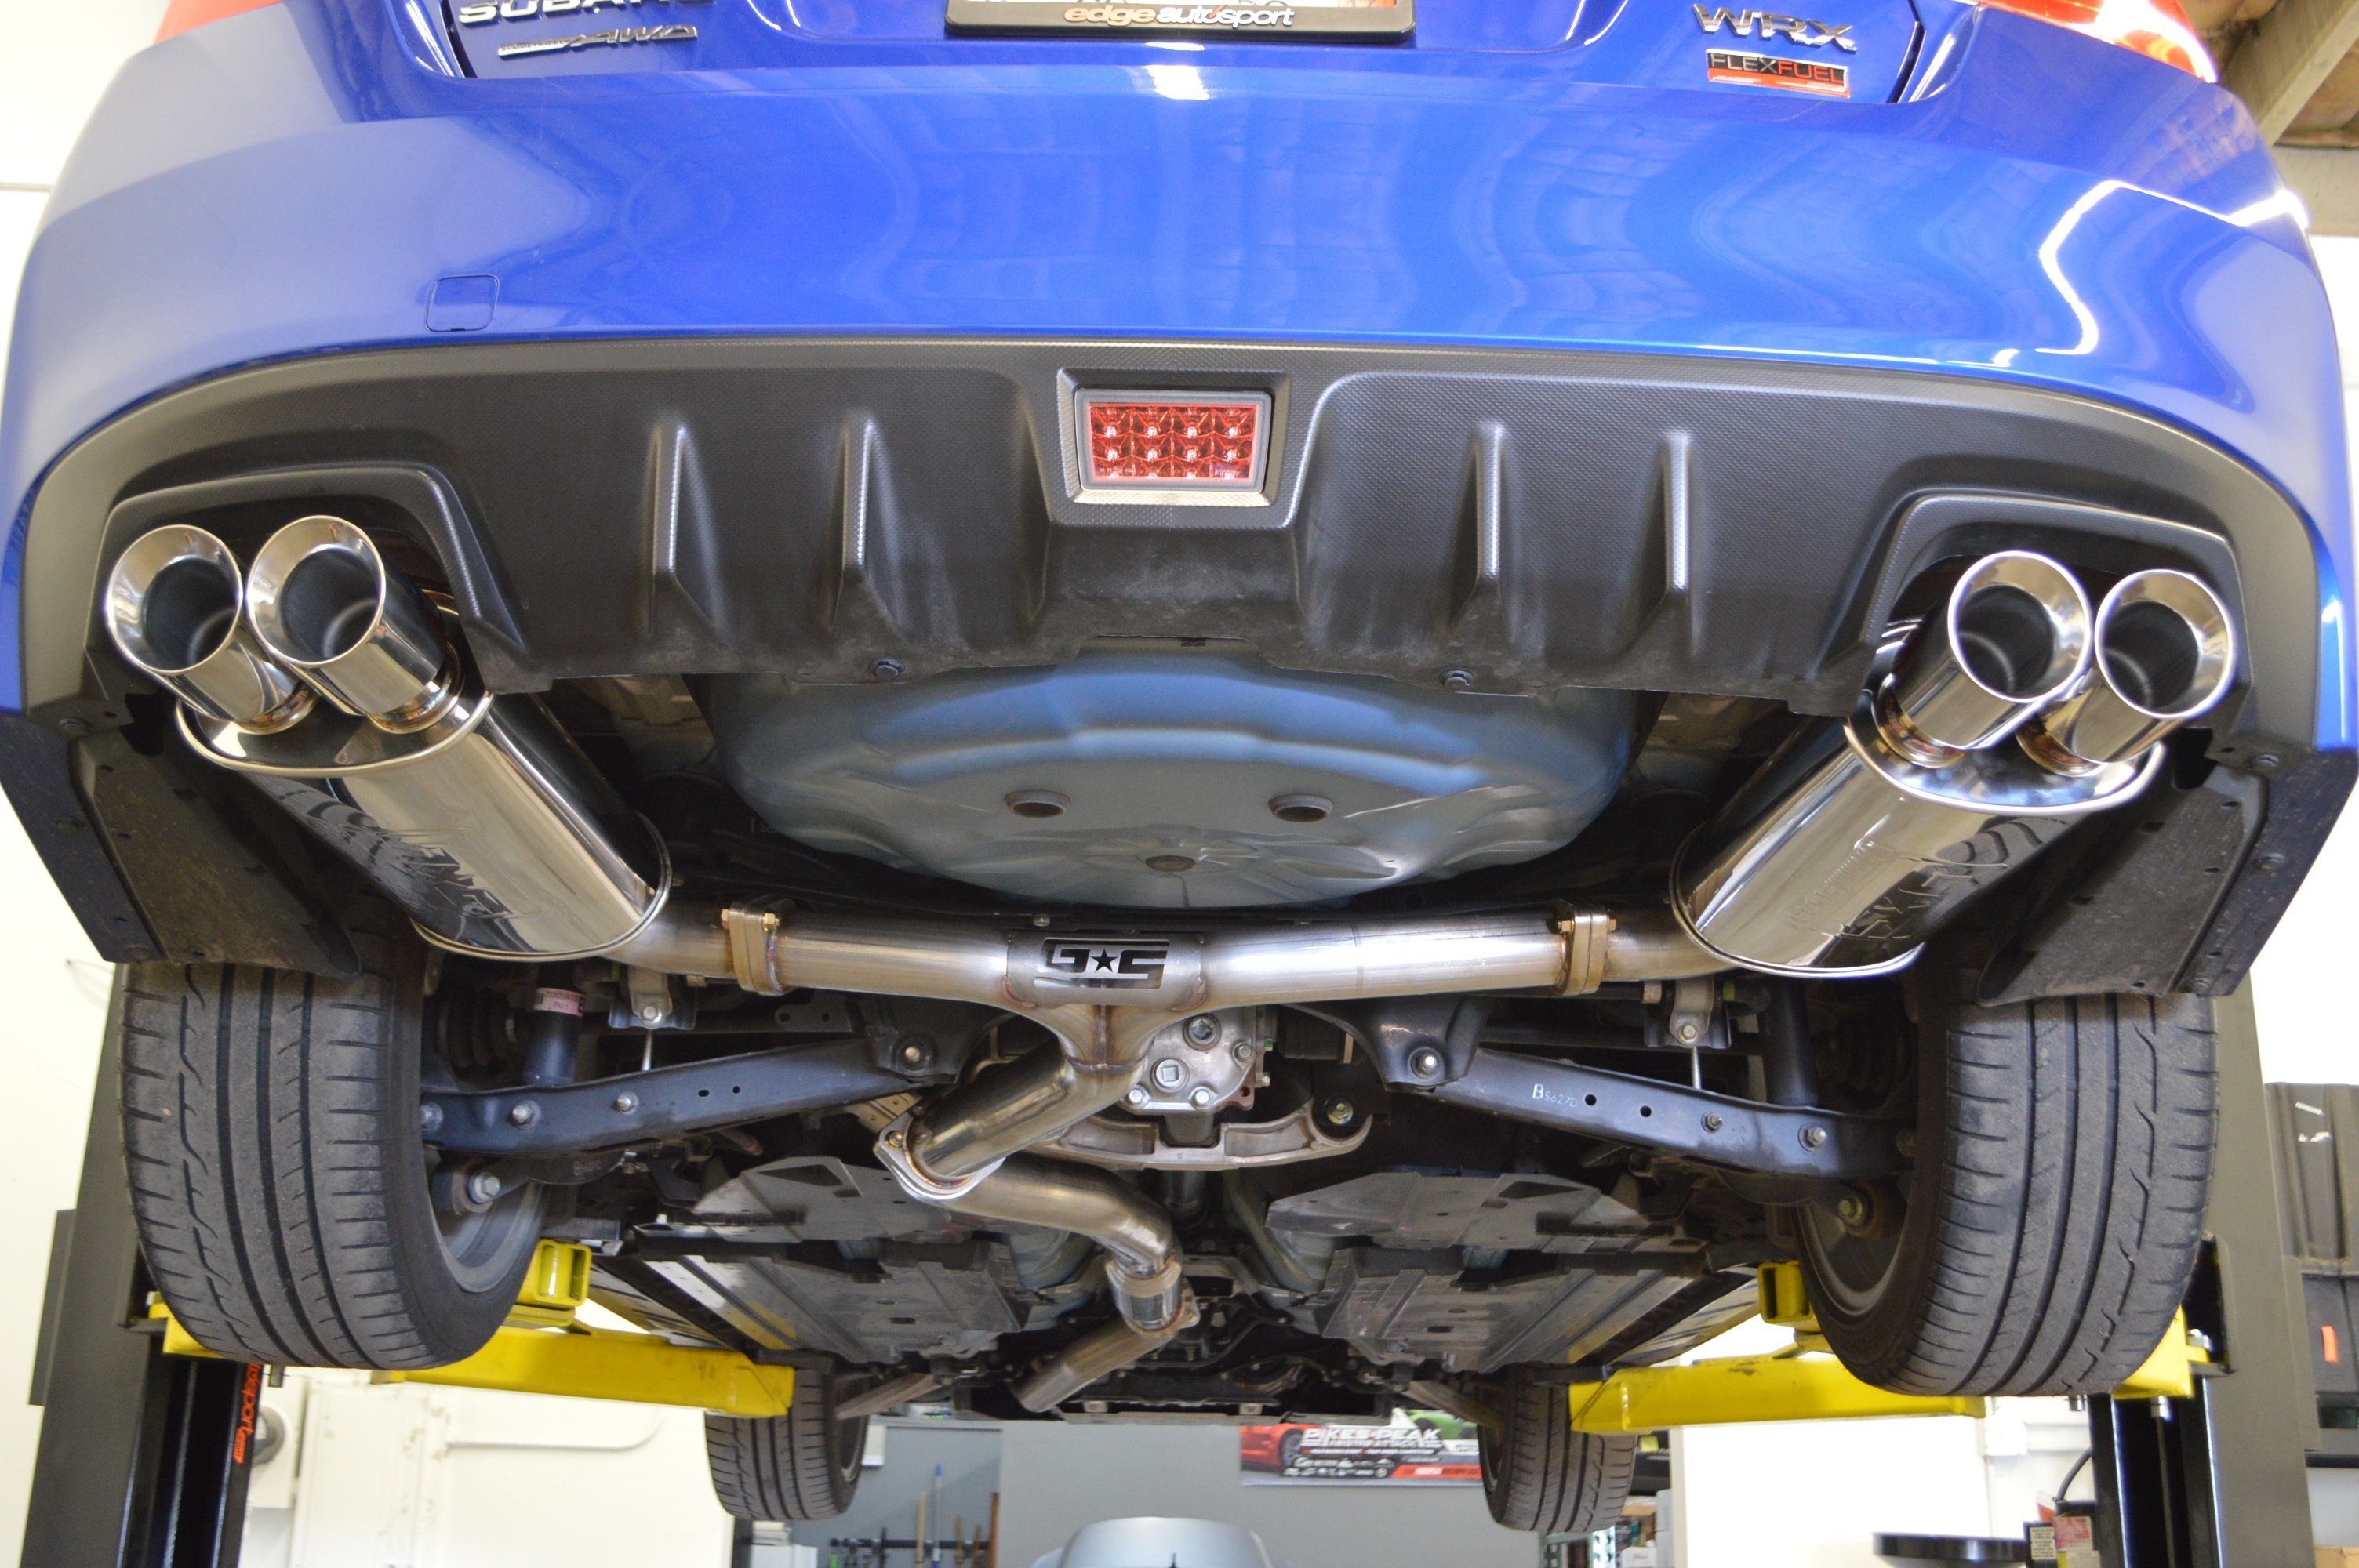 New Product Grimmspeed Catback Exhaust for Subaru WRX and STI